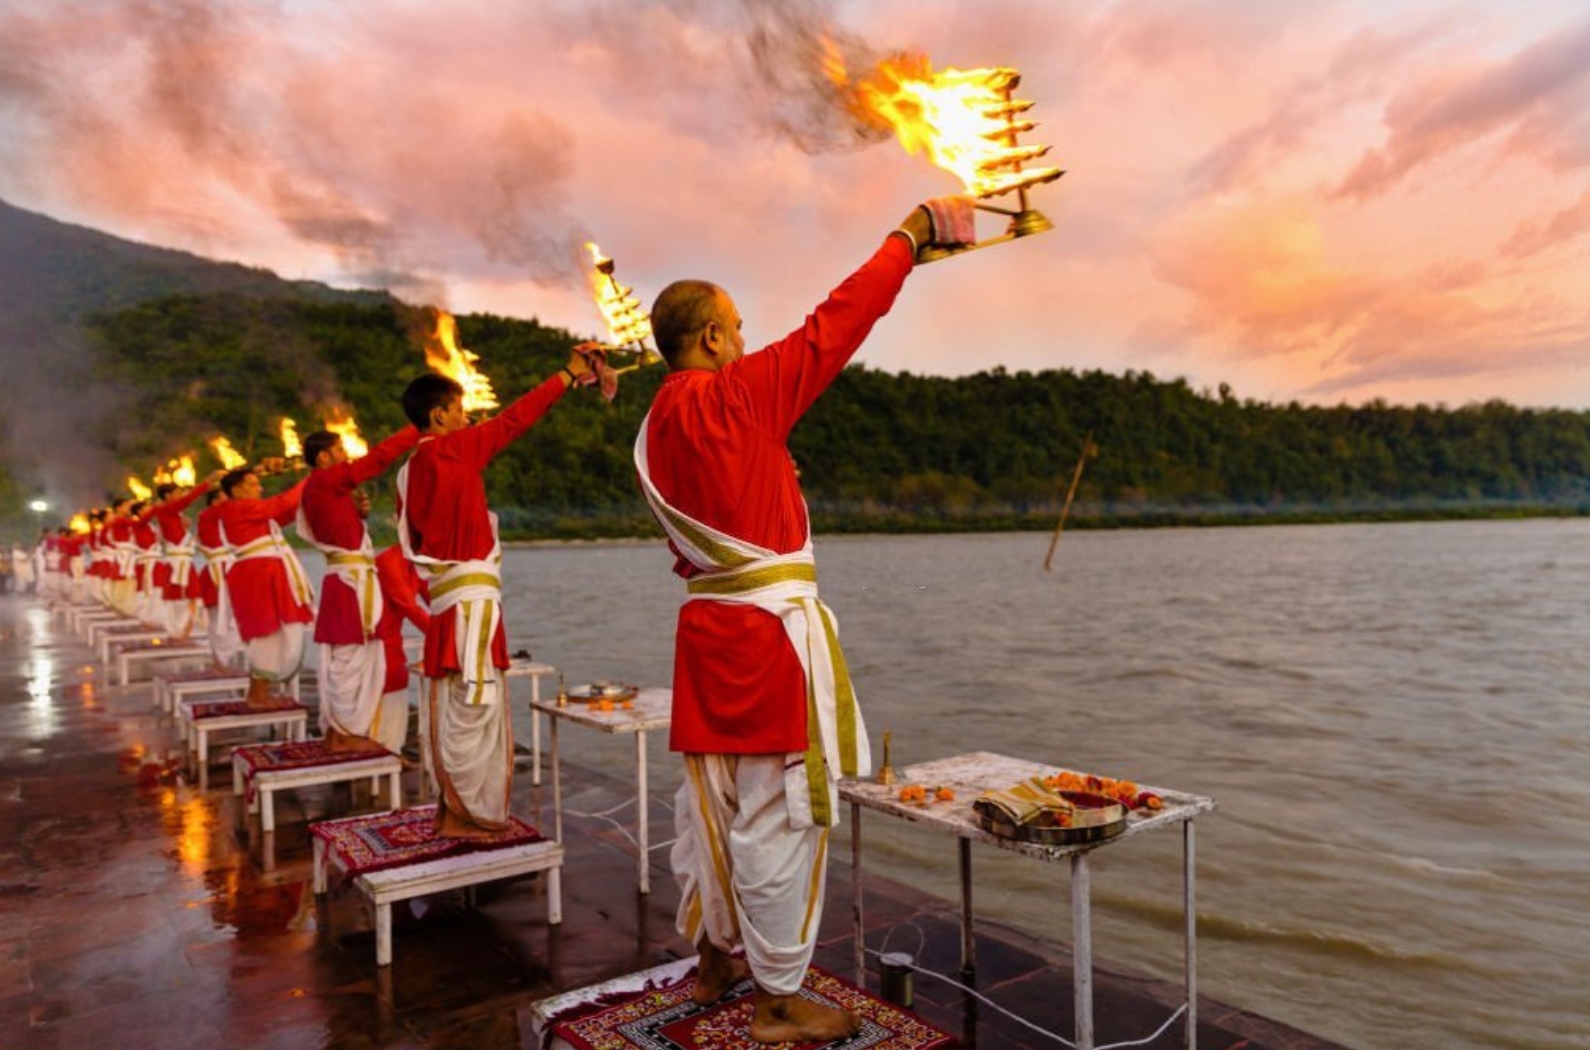 Priests in red robe in the holy city of Rishikesh in Uttarakhand, India during the evening light ceremony called Ganga arthi to worship river Ganga _ Ganges.